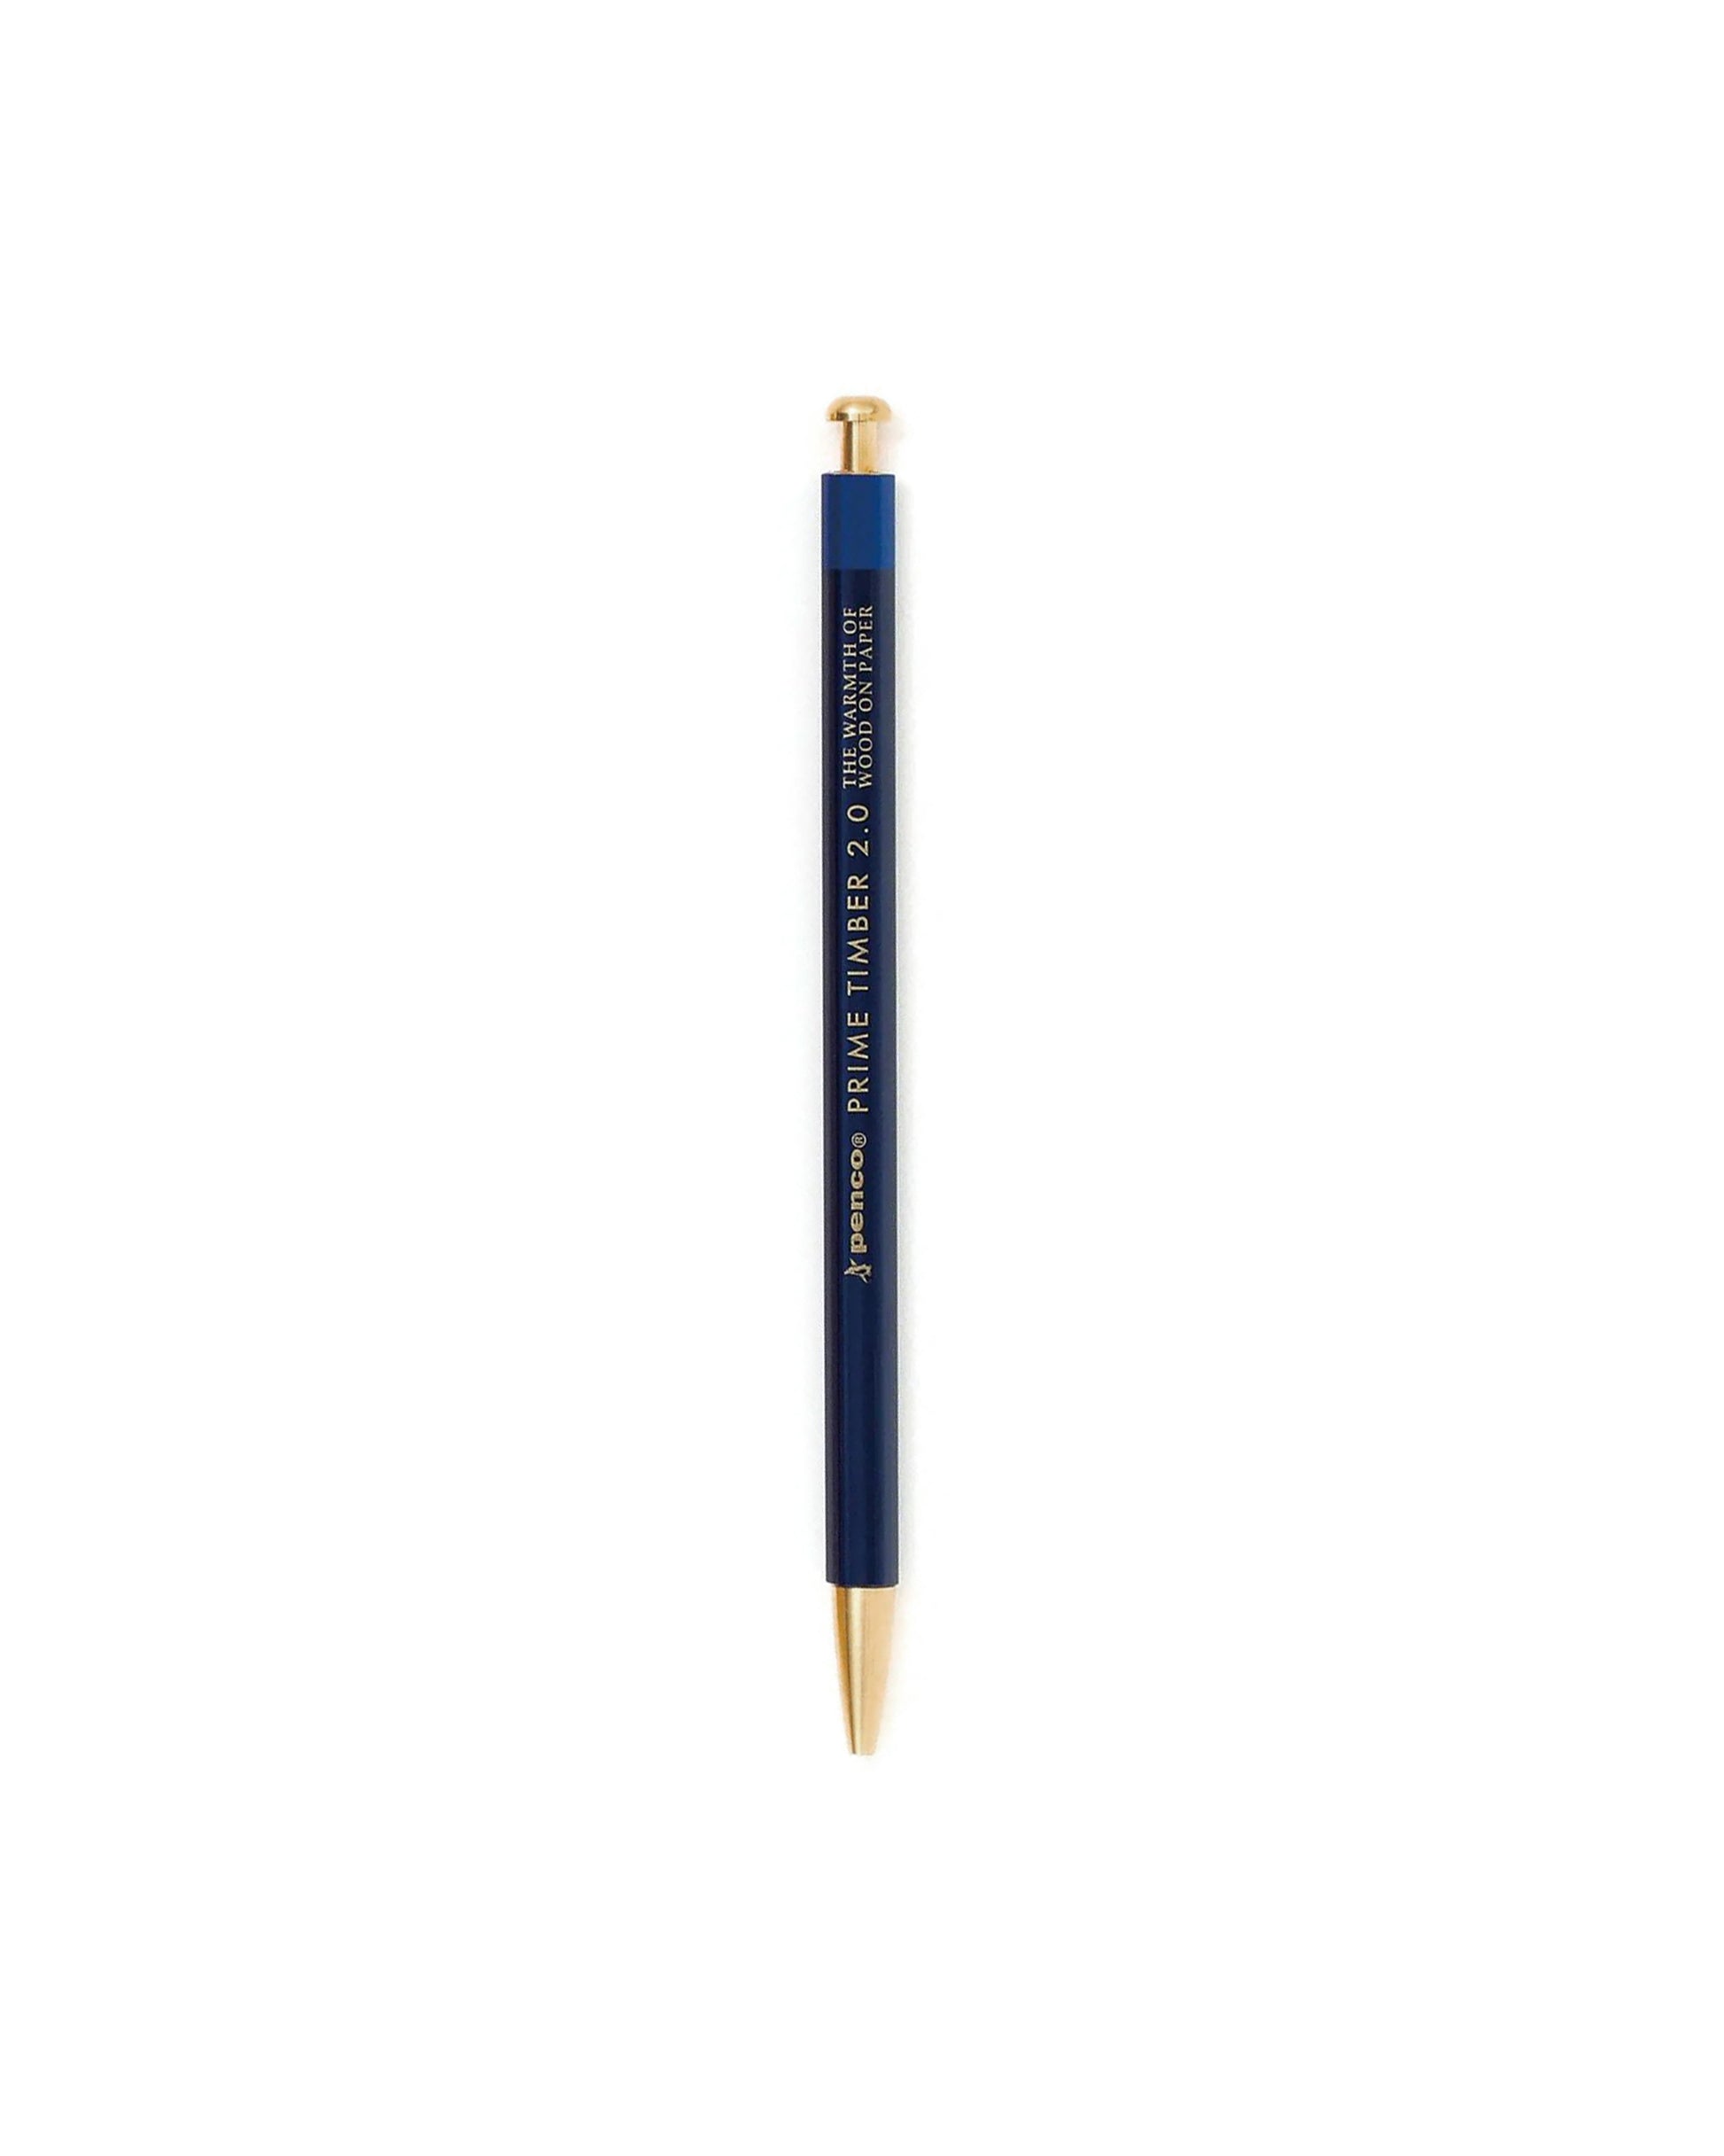 Navy clutch pencil made with eco-friendly wood, Penco brand.